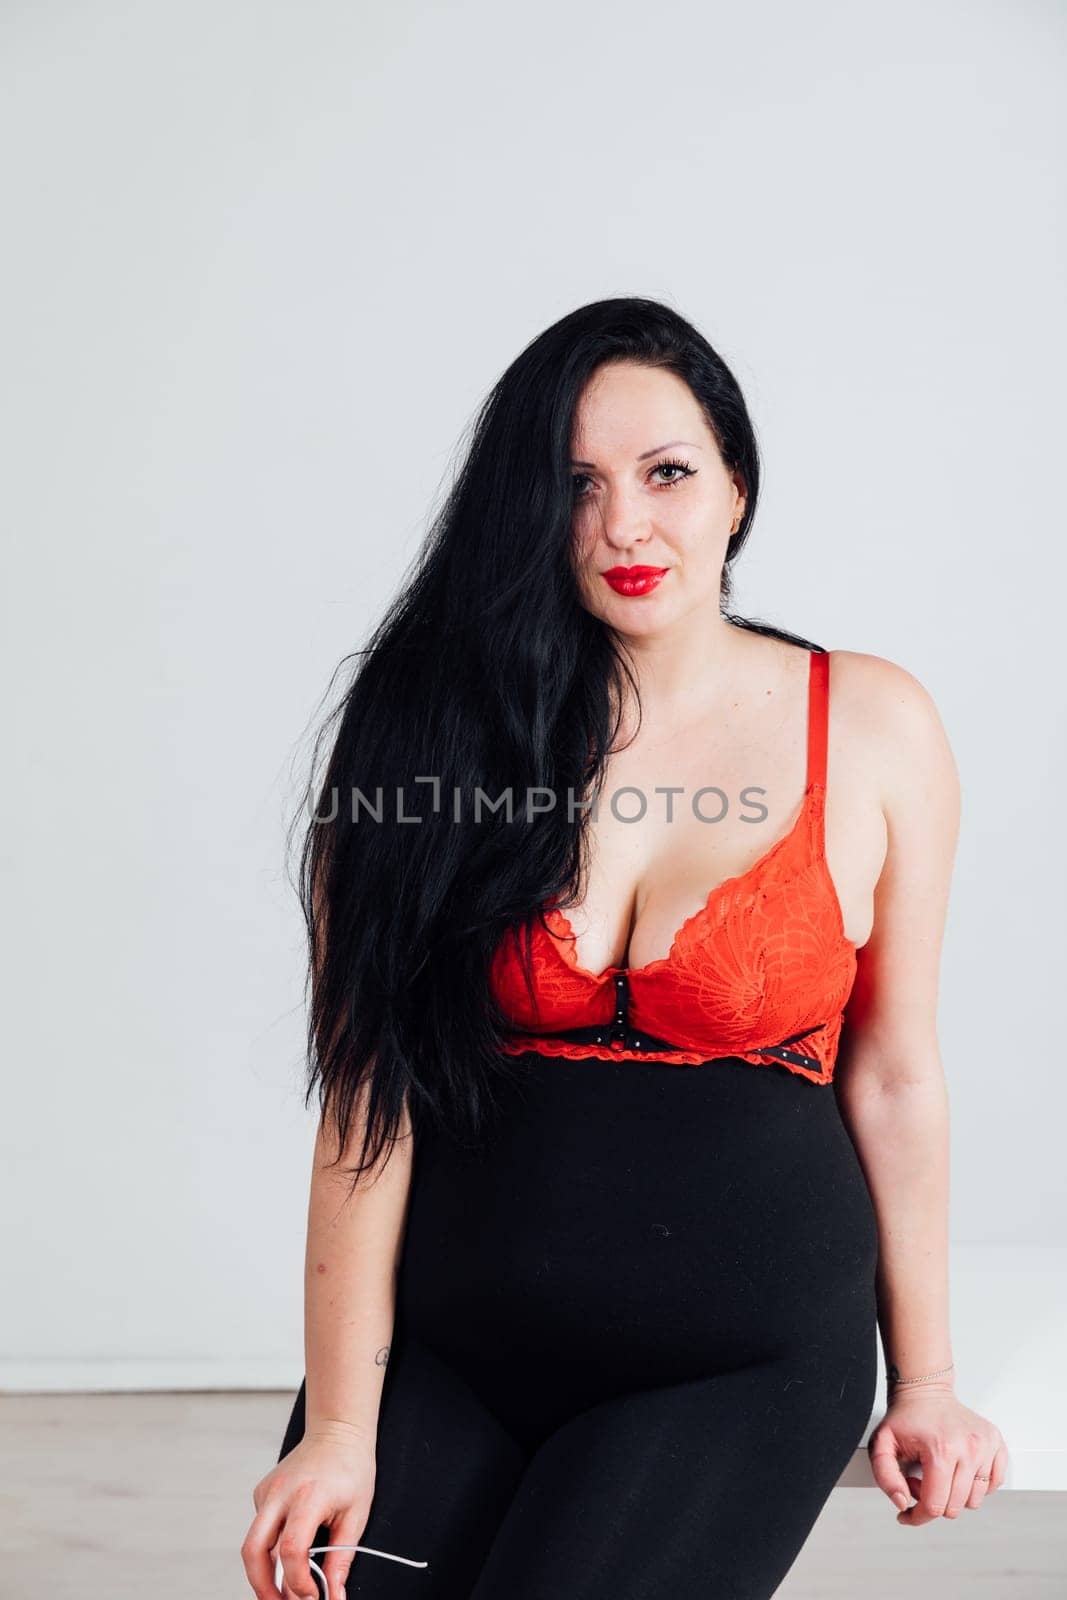 Fat woman posing on white background by Simakov